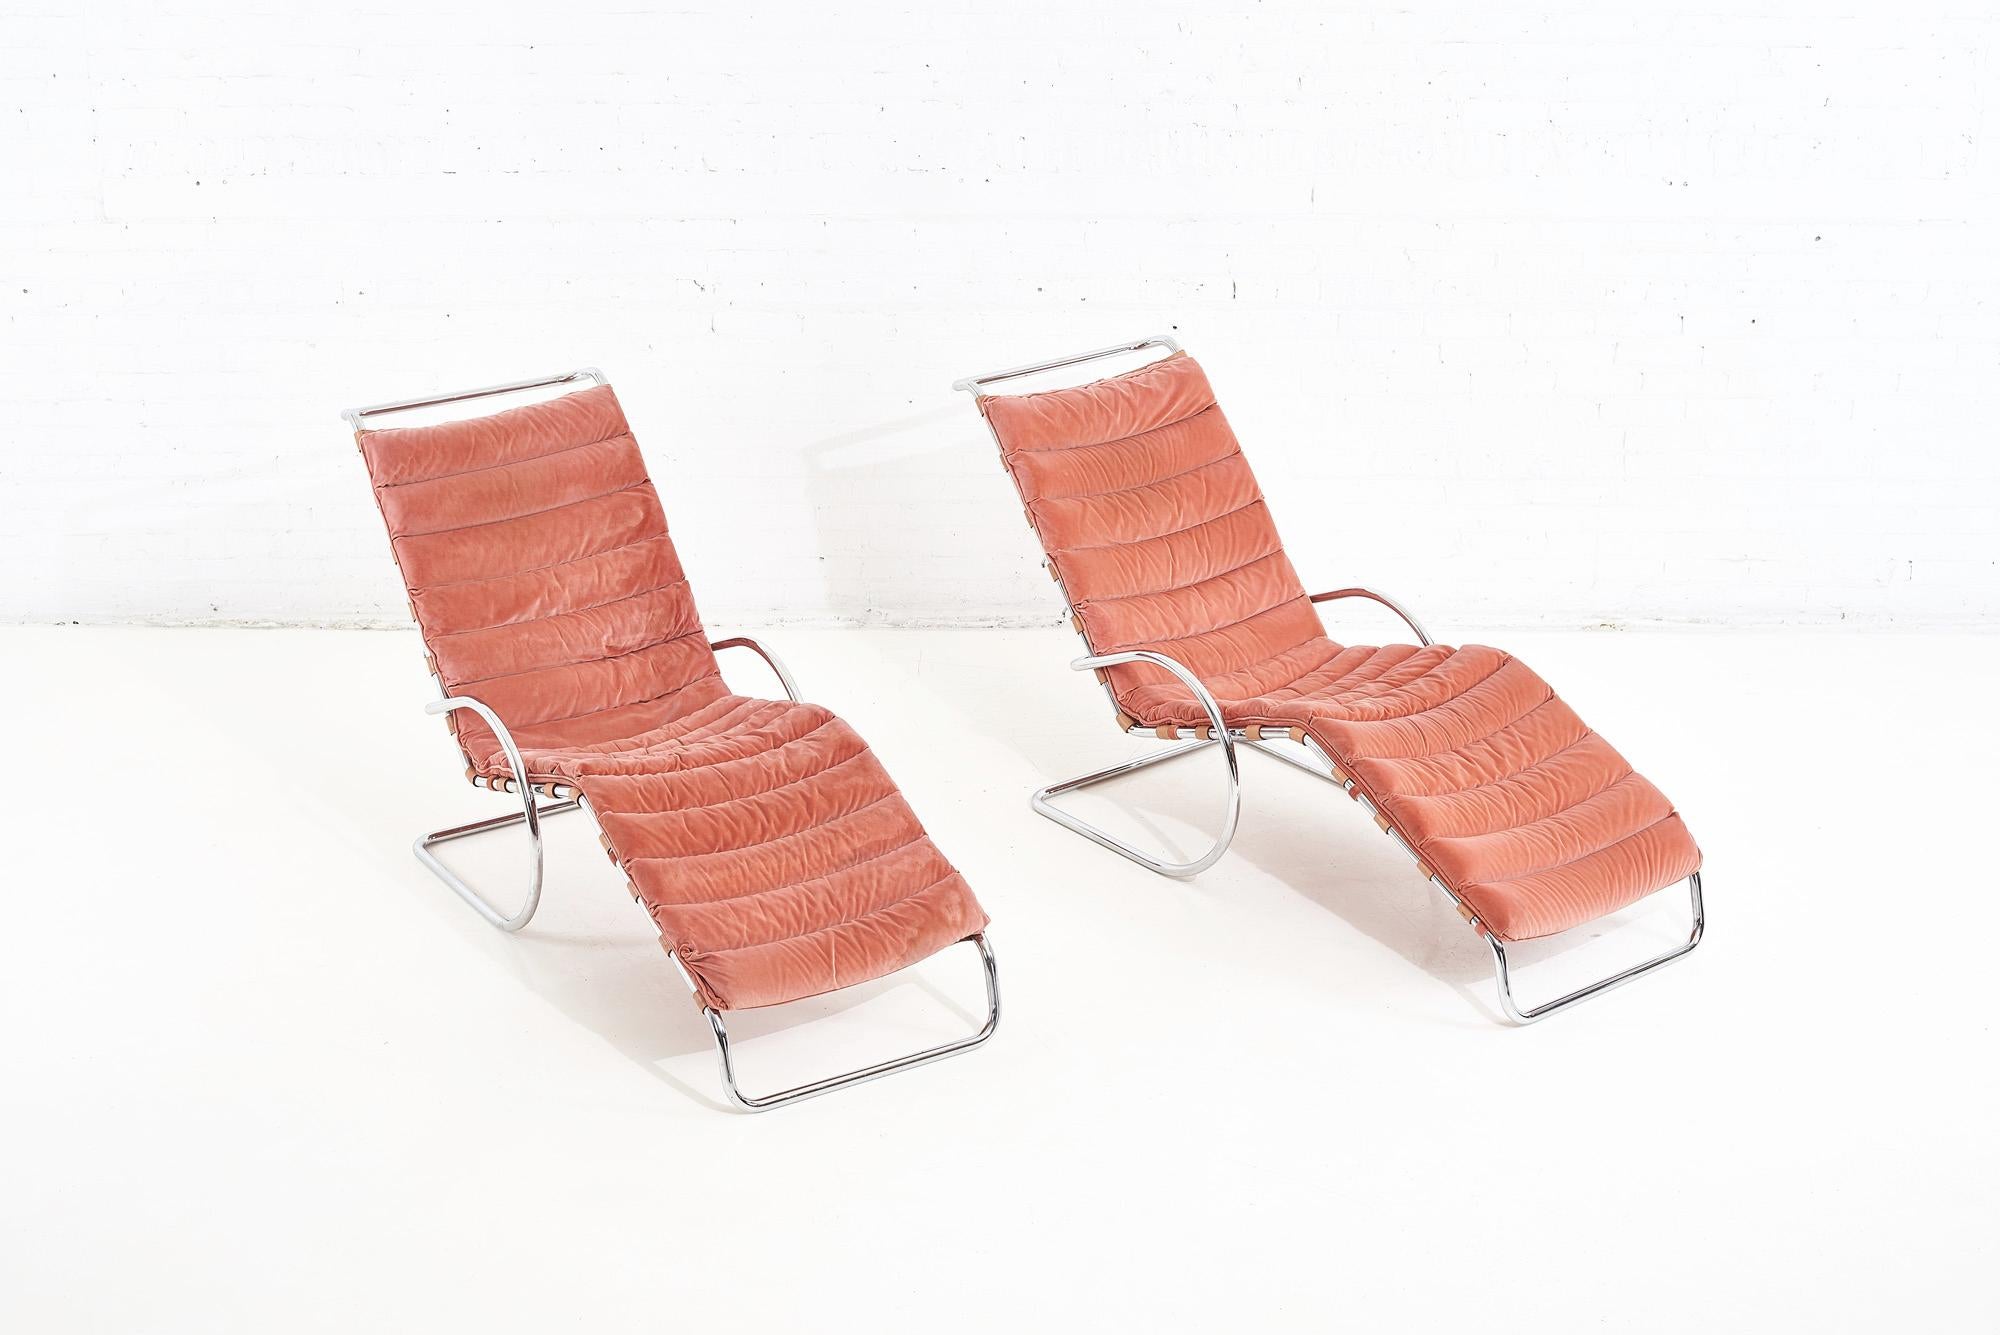 American Ludwig Mies van der Rohe Mr Adjustable Chaise, Knoll, 1980 For Sale